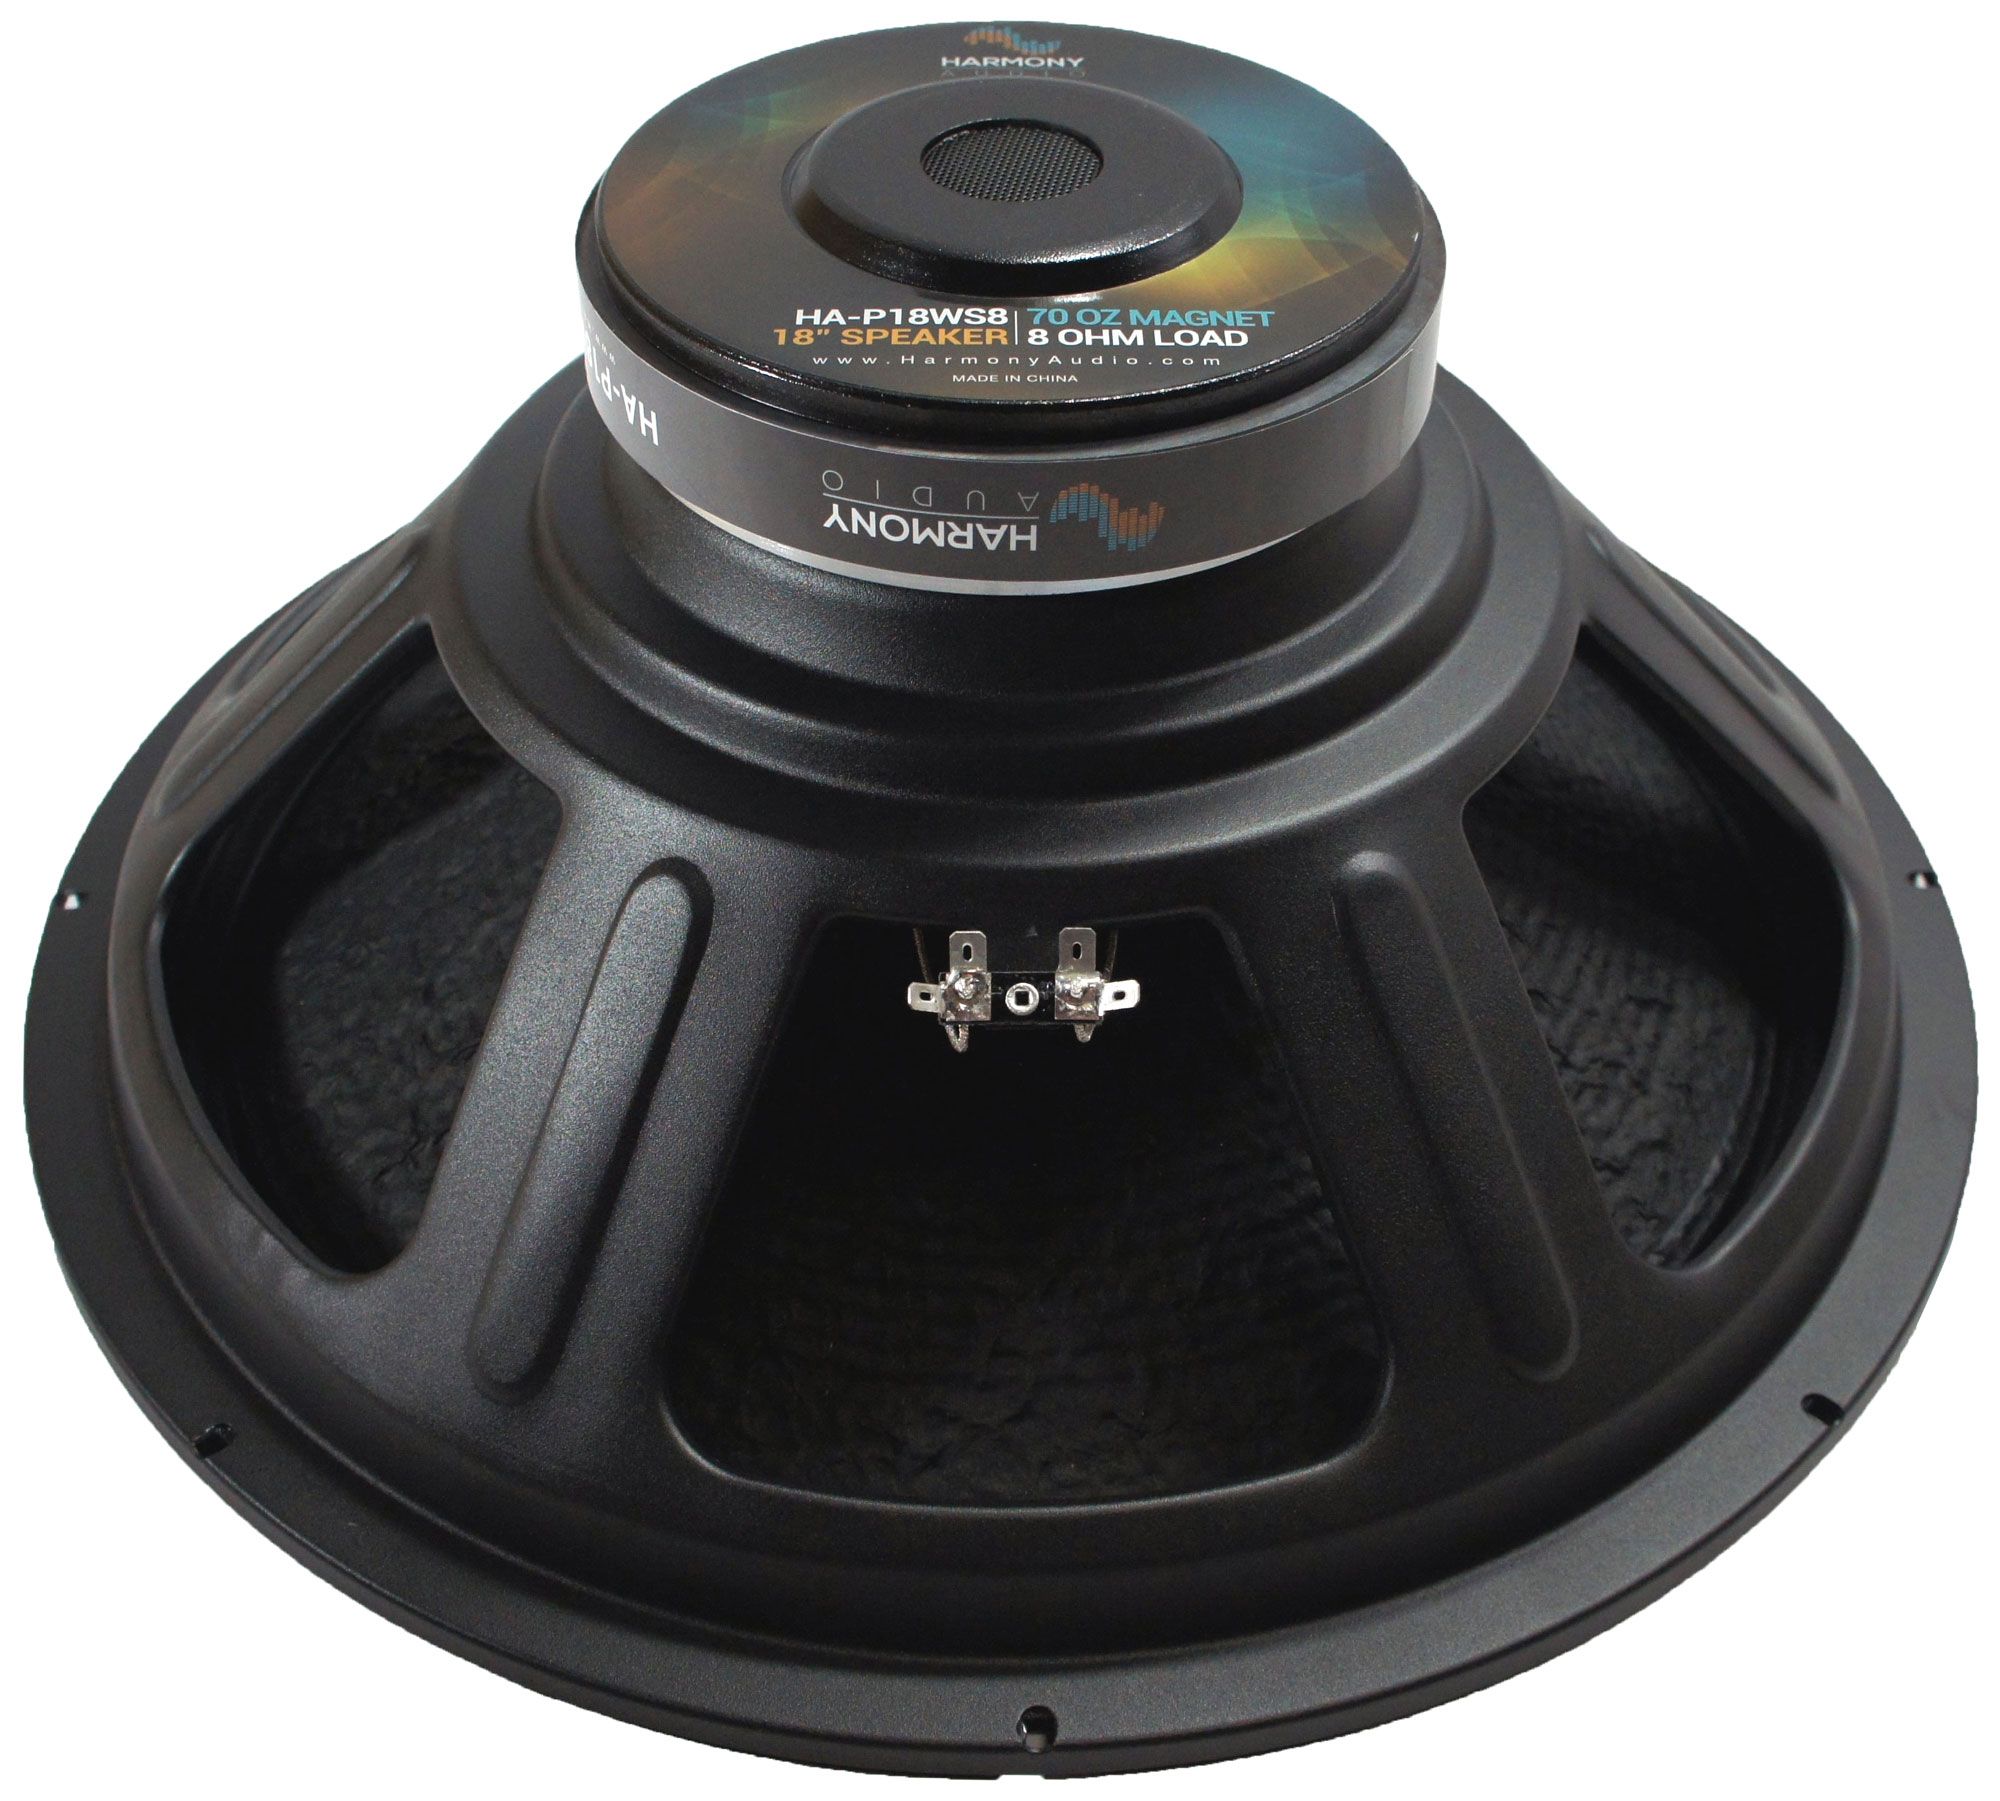 4x Harmony HA-P18"WS8 Raw Replacement 18" Pro PA 1200W Sub Speaker 8 Ohm Woofer - image 4 of 6